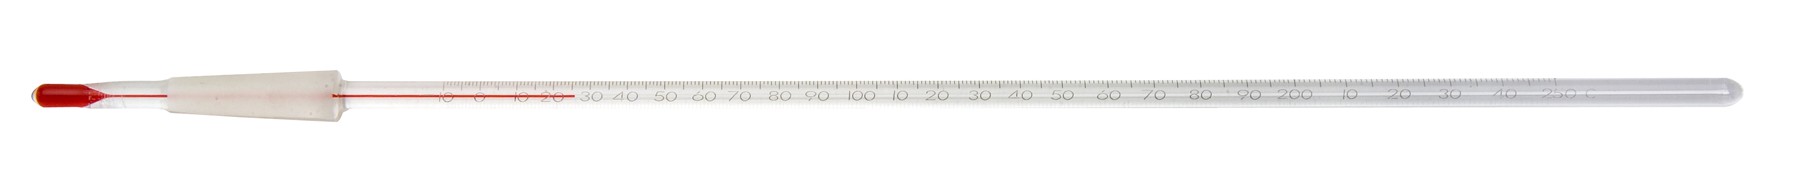 SP Bel-Art, H-B DURAC 10/30 Ground Joint Liquid-In-Glass Thermometer; -10 to 250C, 75mm Immersion, Organic Liquid Fill